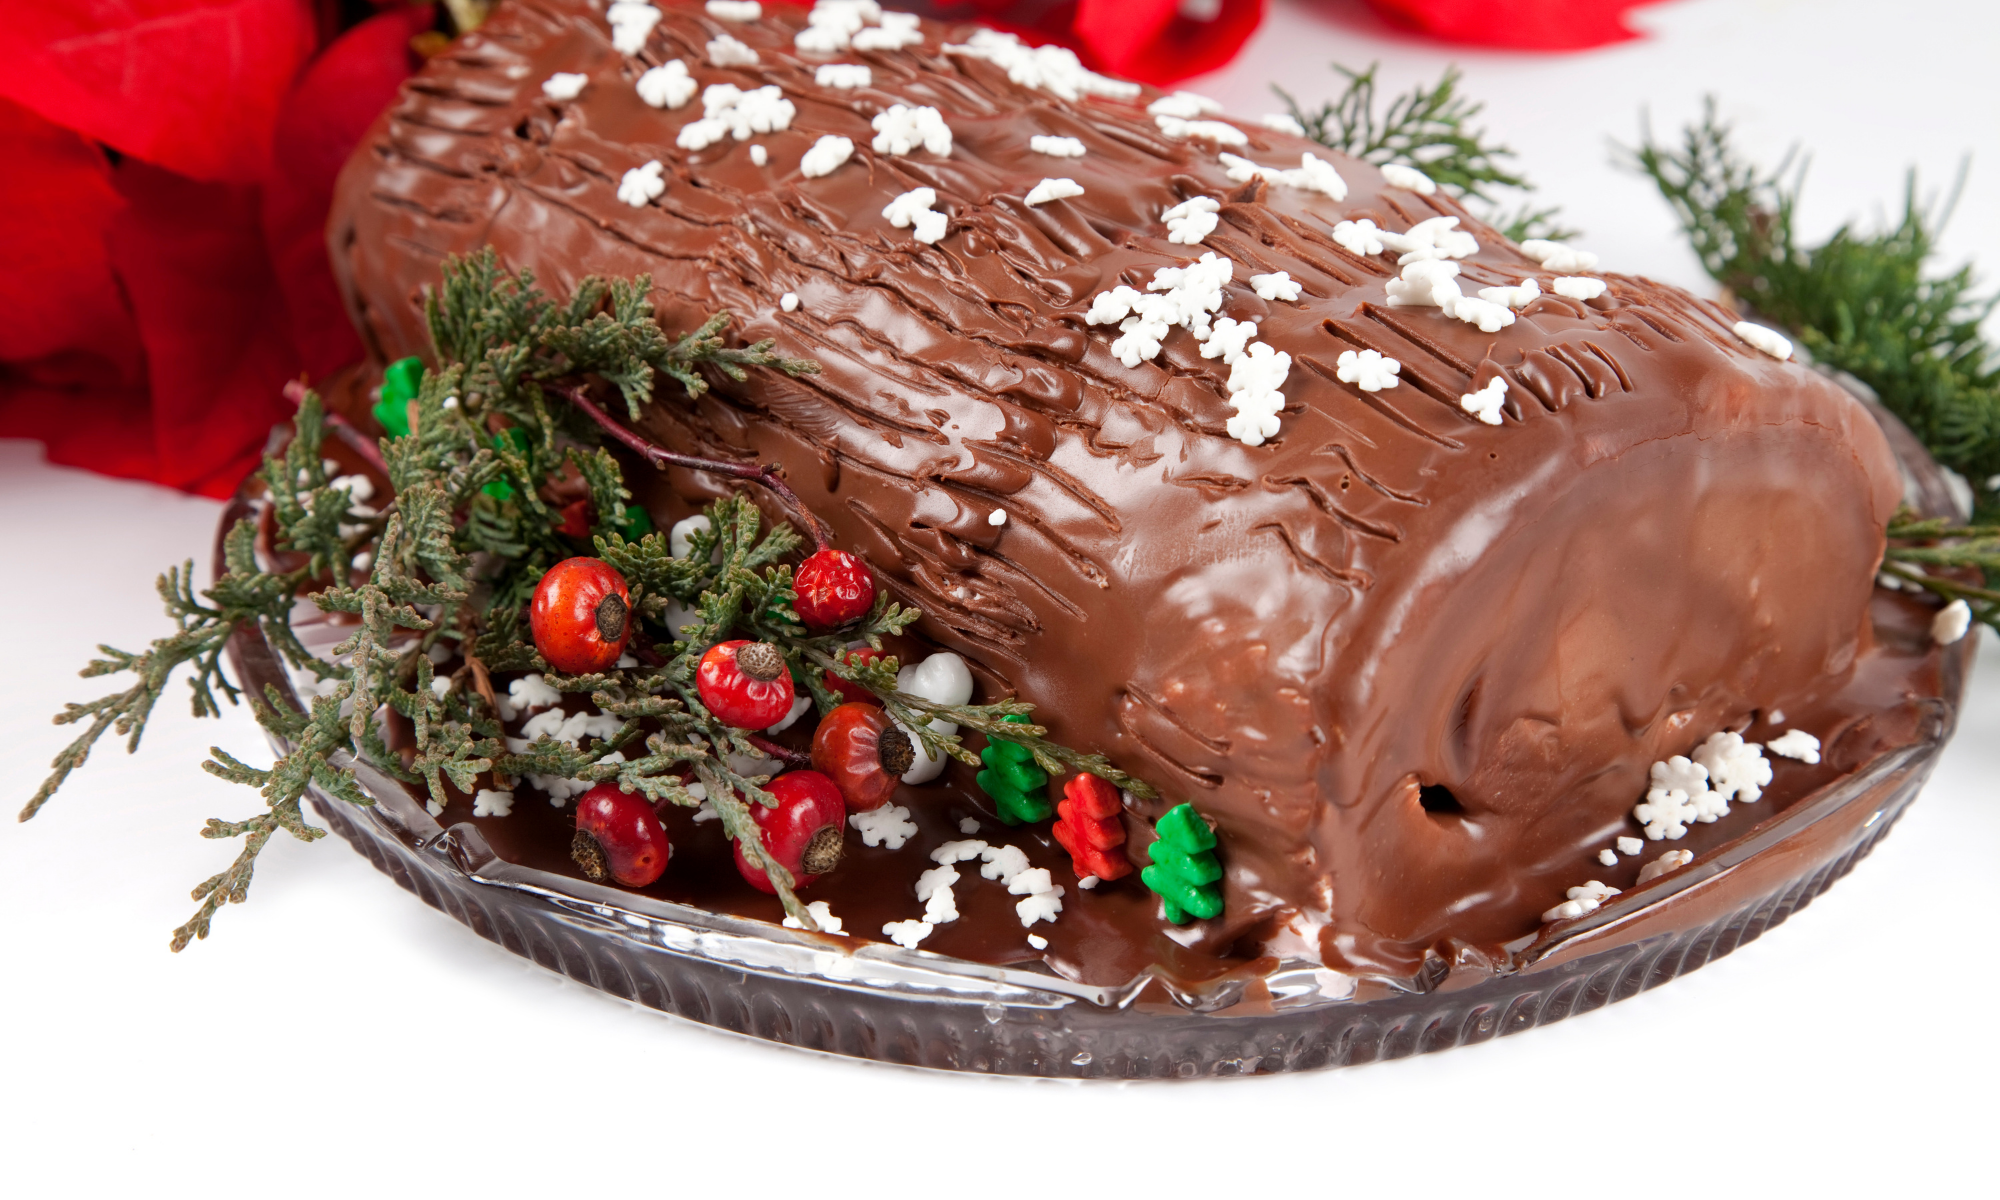 A chocolate yule log with tiny snowflakes and garnish around it